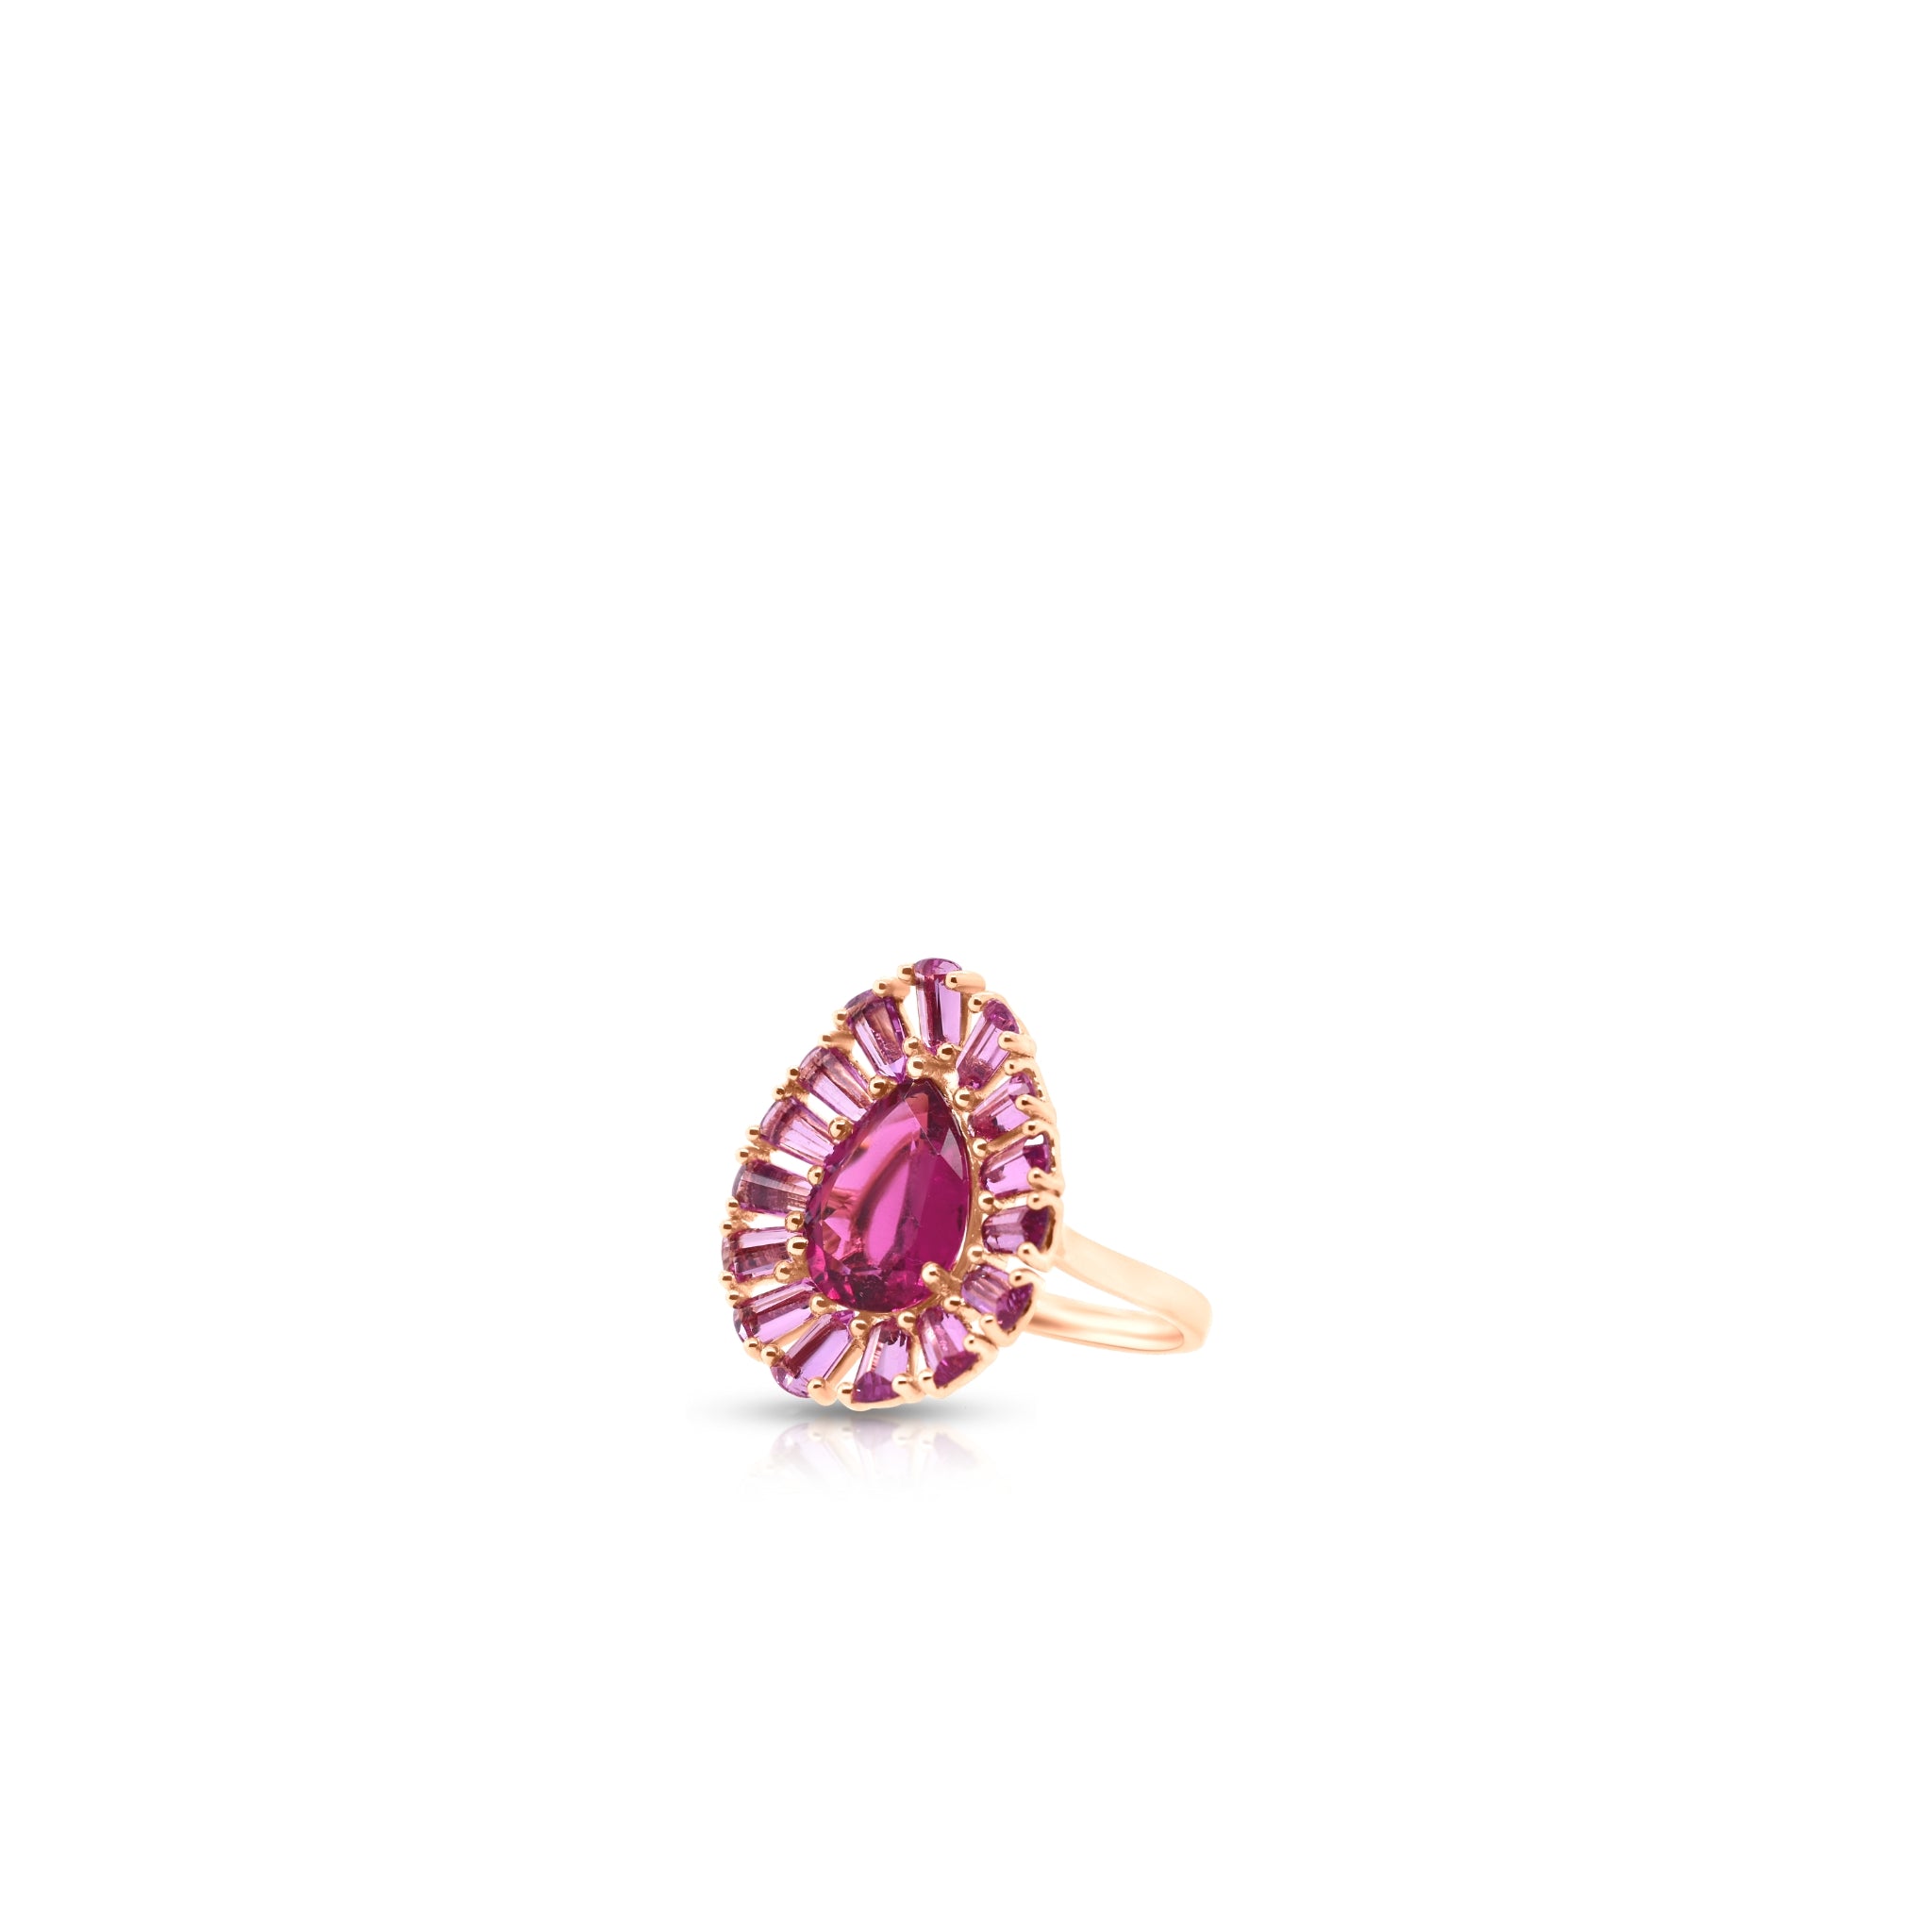 LOVE IS IN THE AIR COCKTAIL RING - Aubrey Gems